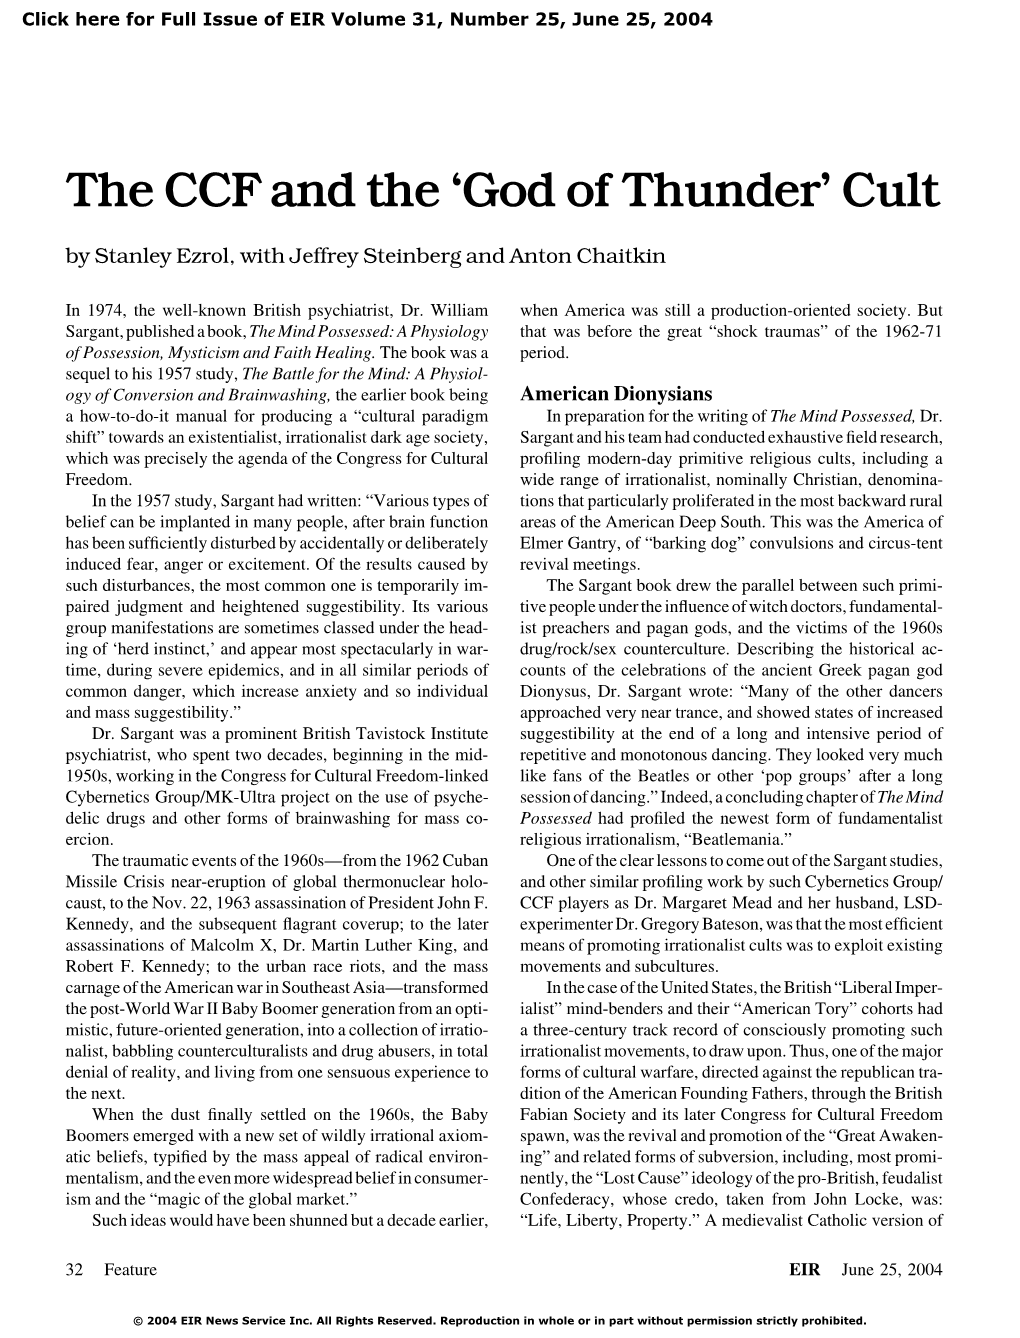 The CCF and the 'God of Thunder' Cult